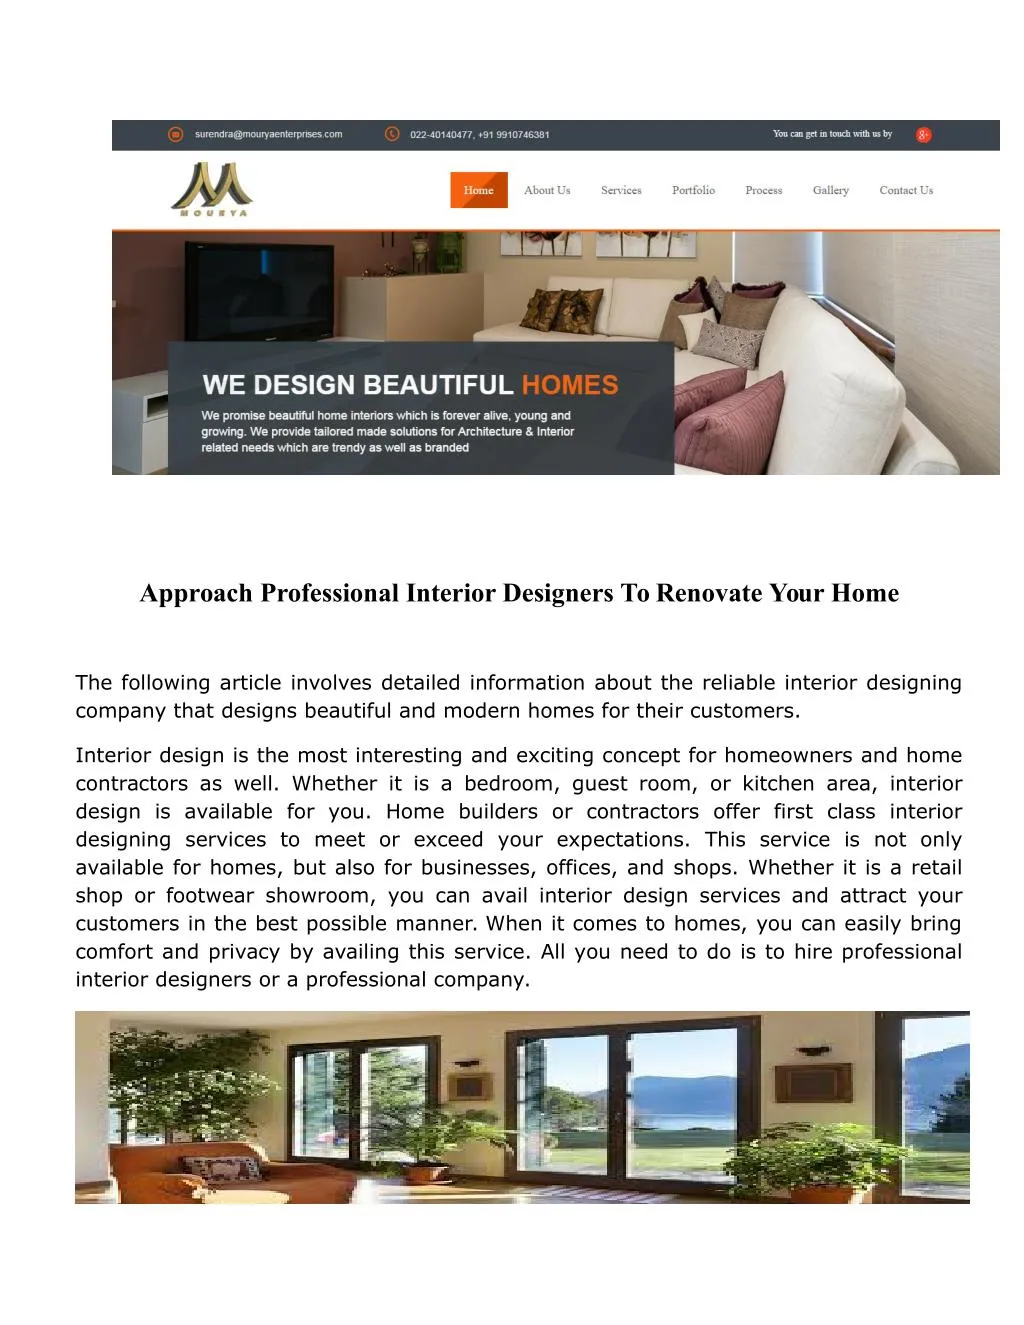 approach professional interior designers